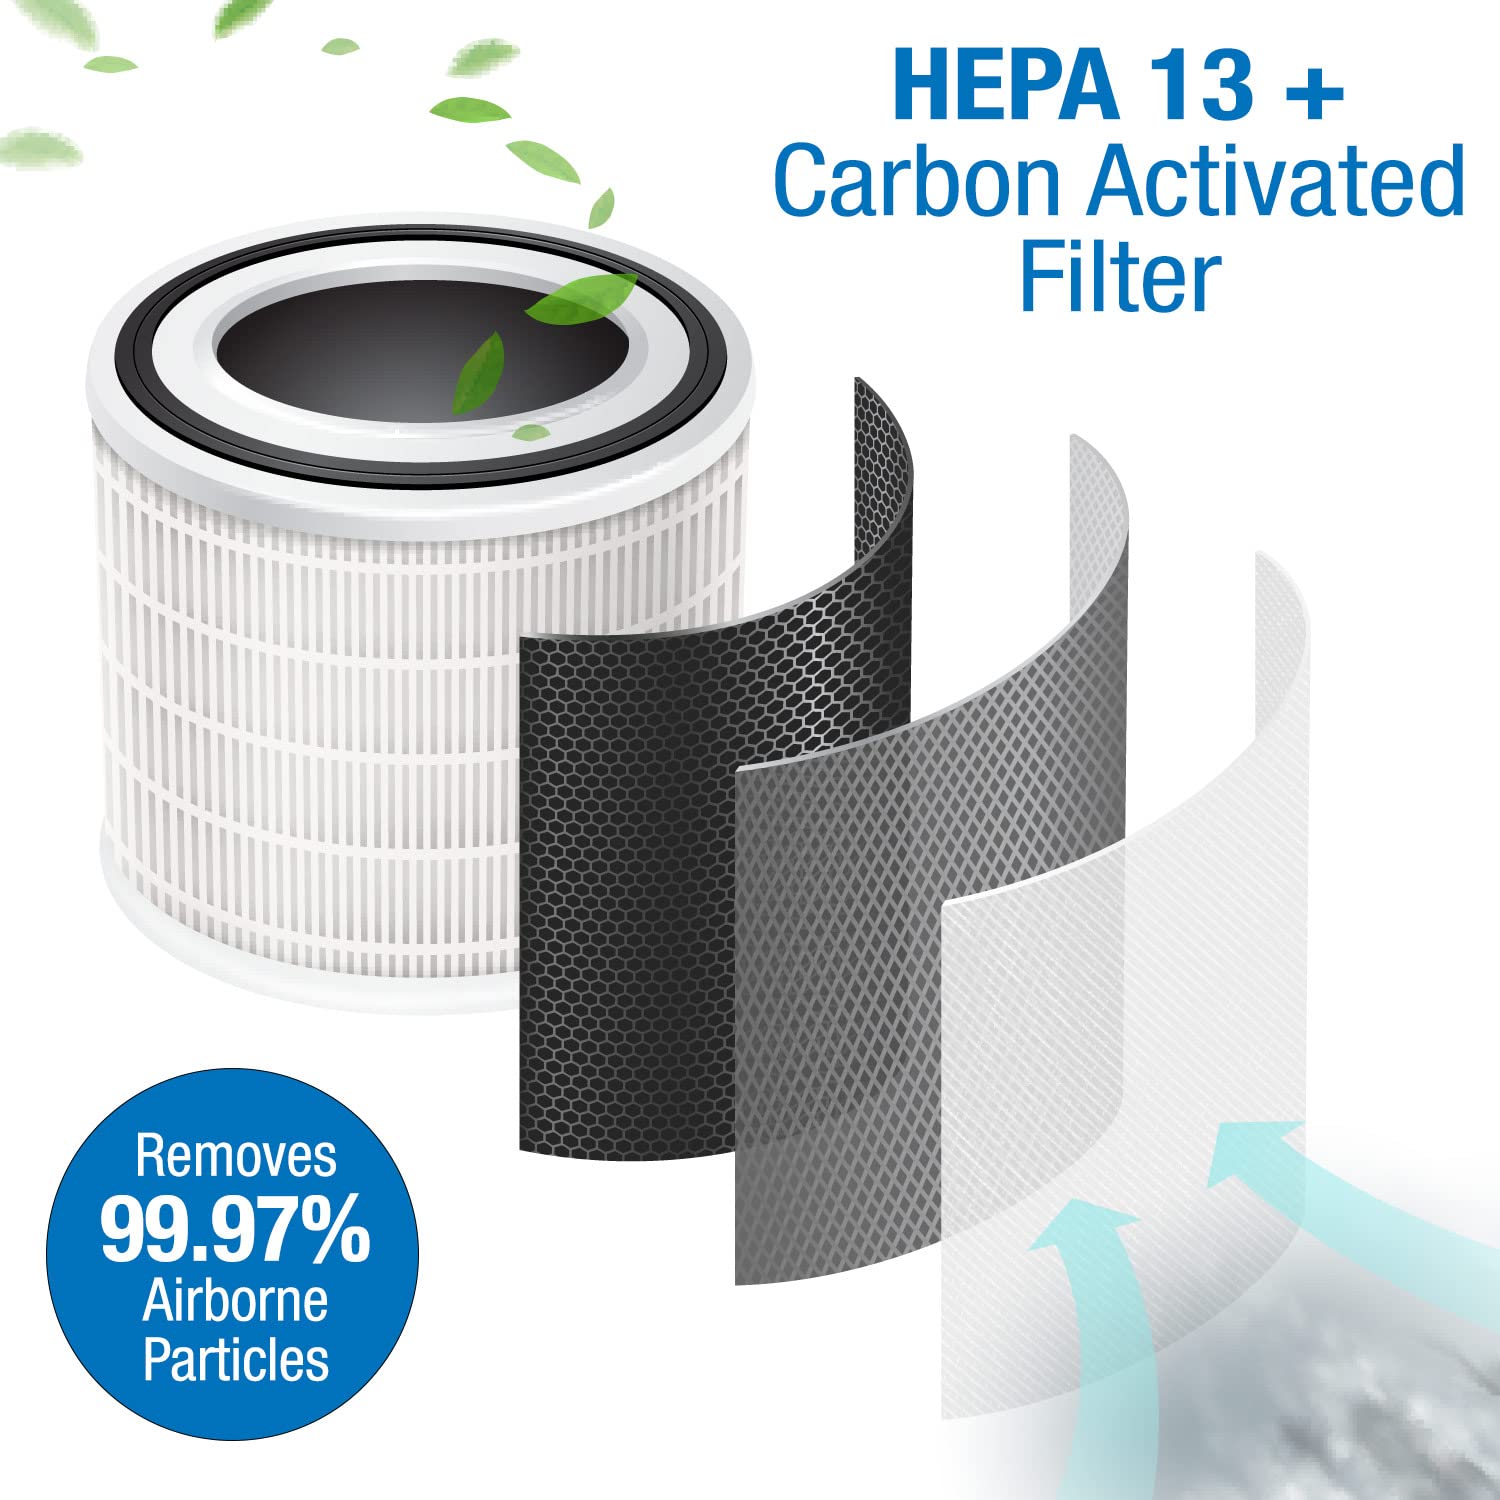 Habitat 150A(e) True HEPA Filtration Air Filter System, Realtime Air Quality Sensor, Covers up to 150ft², Removes 99.97% of Airborne Particles and Viruses, Long-Lasting Filter, Quiet Fan Mode